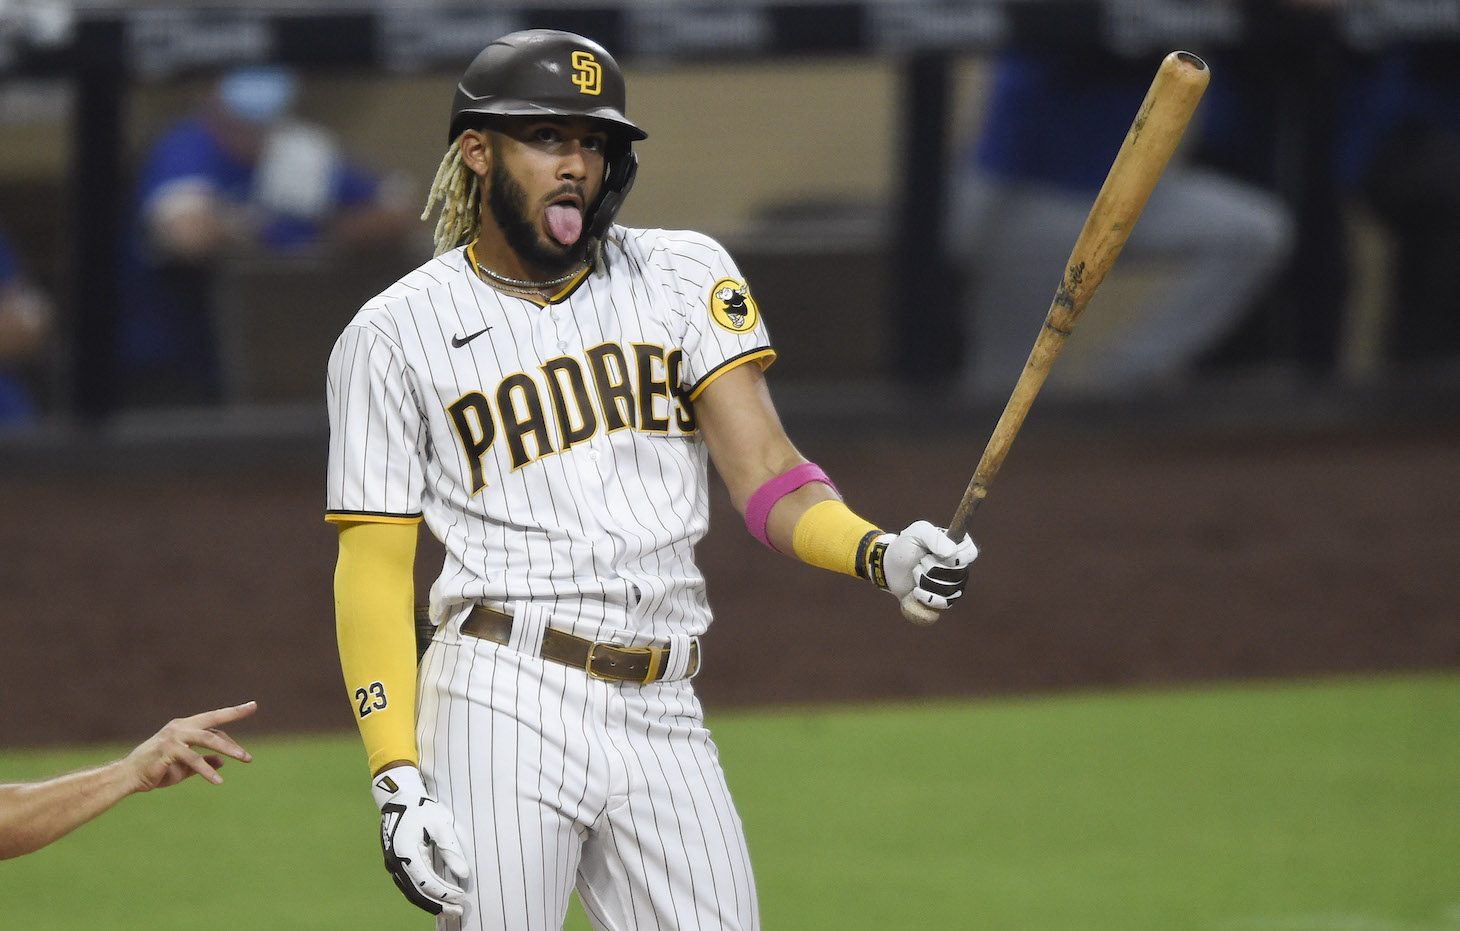 SAN DIEGO, CA - SEPTEMBER 14: Fernando Tatis Jr. #23 of the San Diego Padres reacts after taking a strike during the third inning of a baseball game against the Los Angeles Dodgers at Petco Park on September 14, 2020 in San Diego, California. (Photo by Denis Poroy/Getty Images)